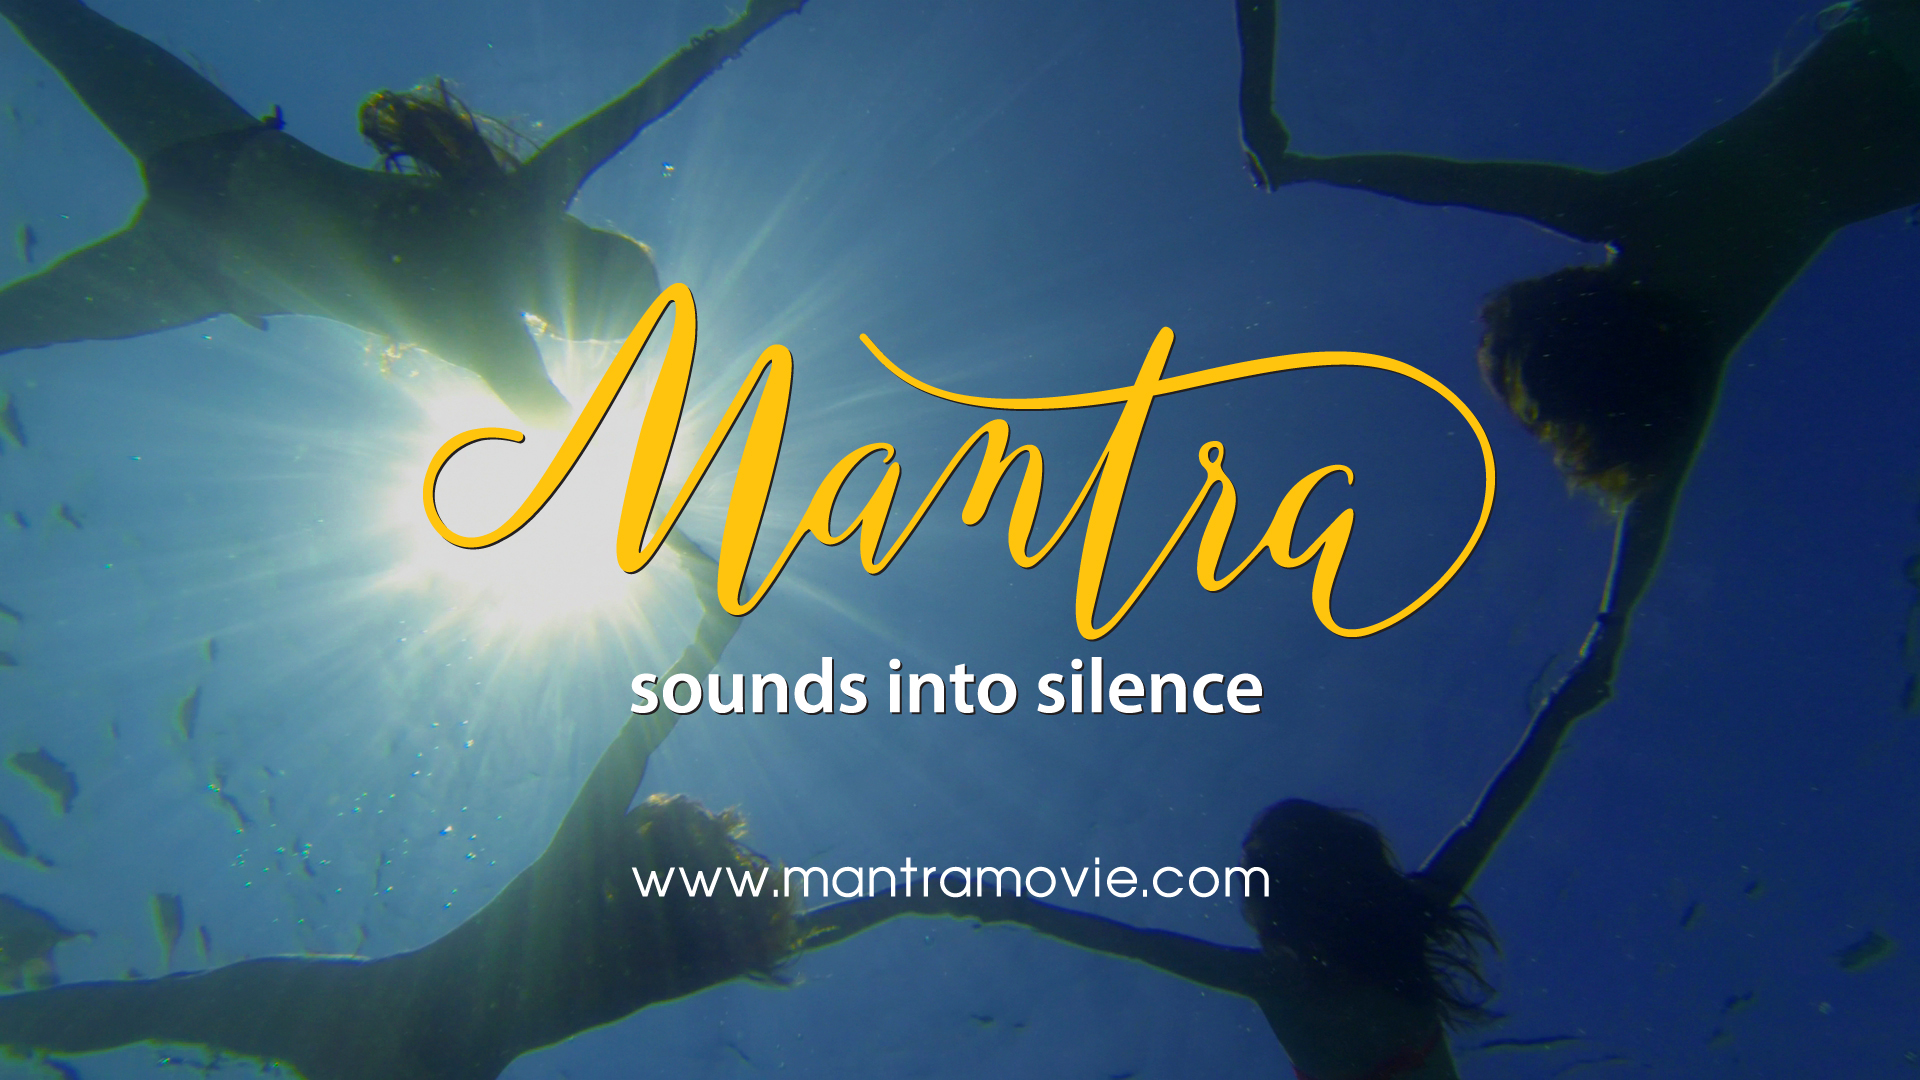 Chants from ‘Mantra: Sounds Into Silence’, Part 2